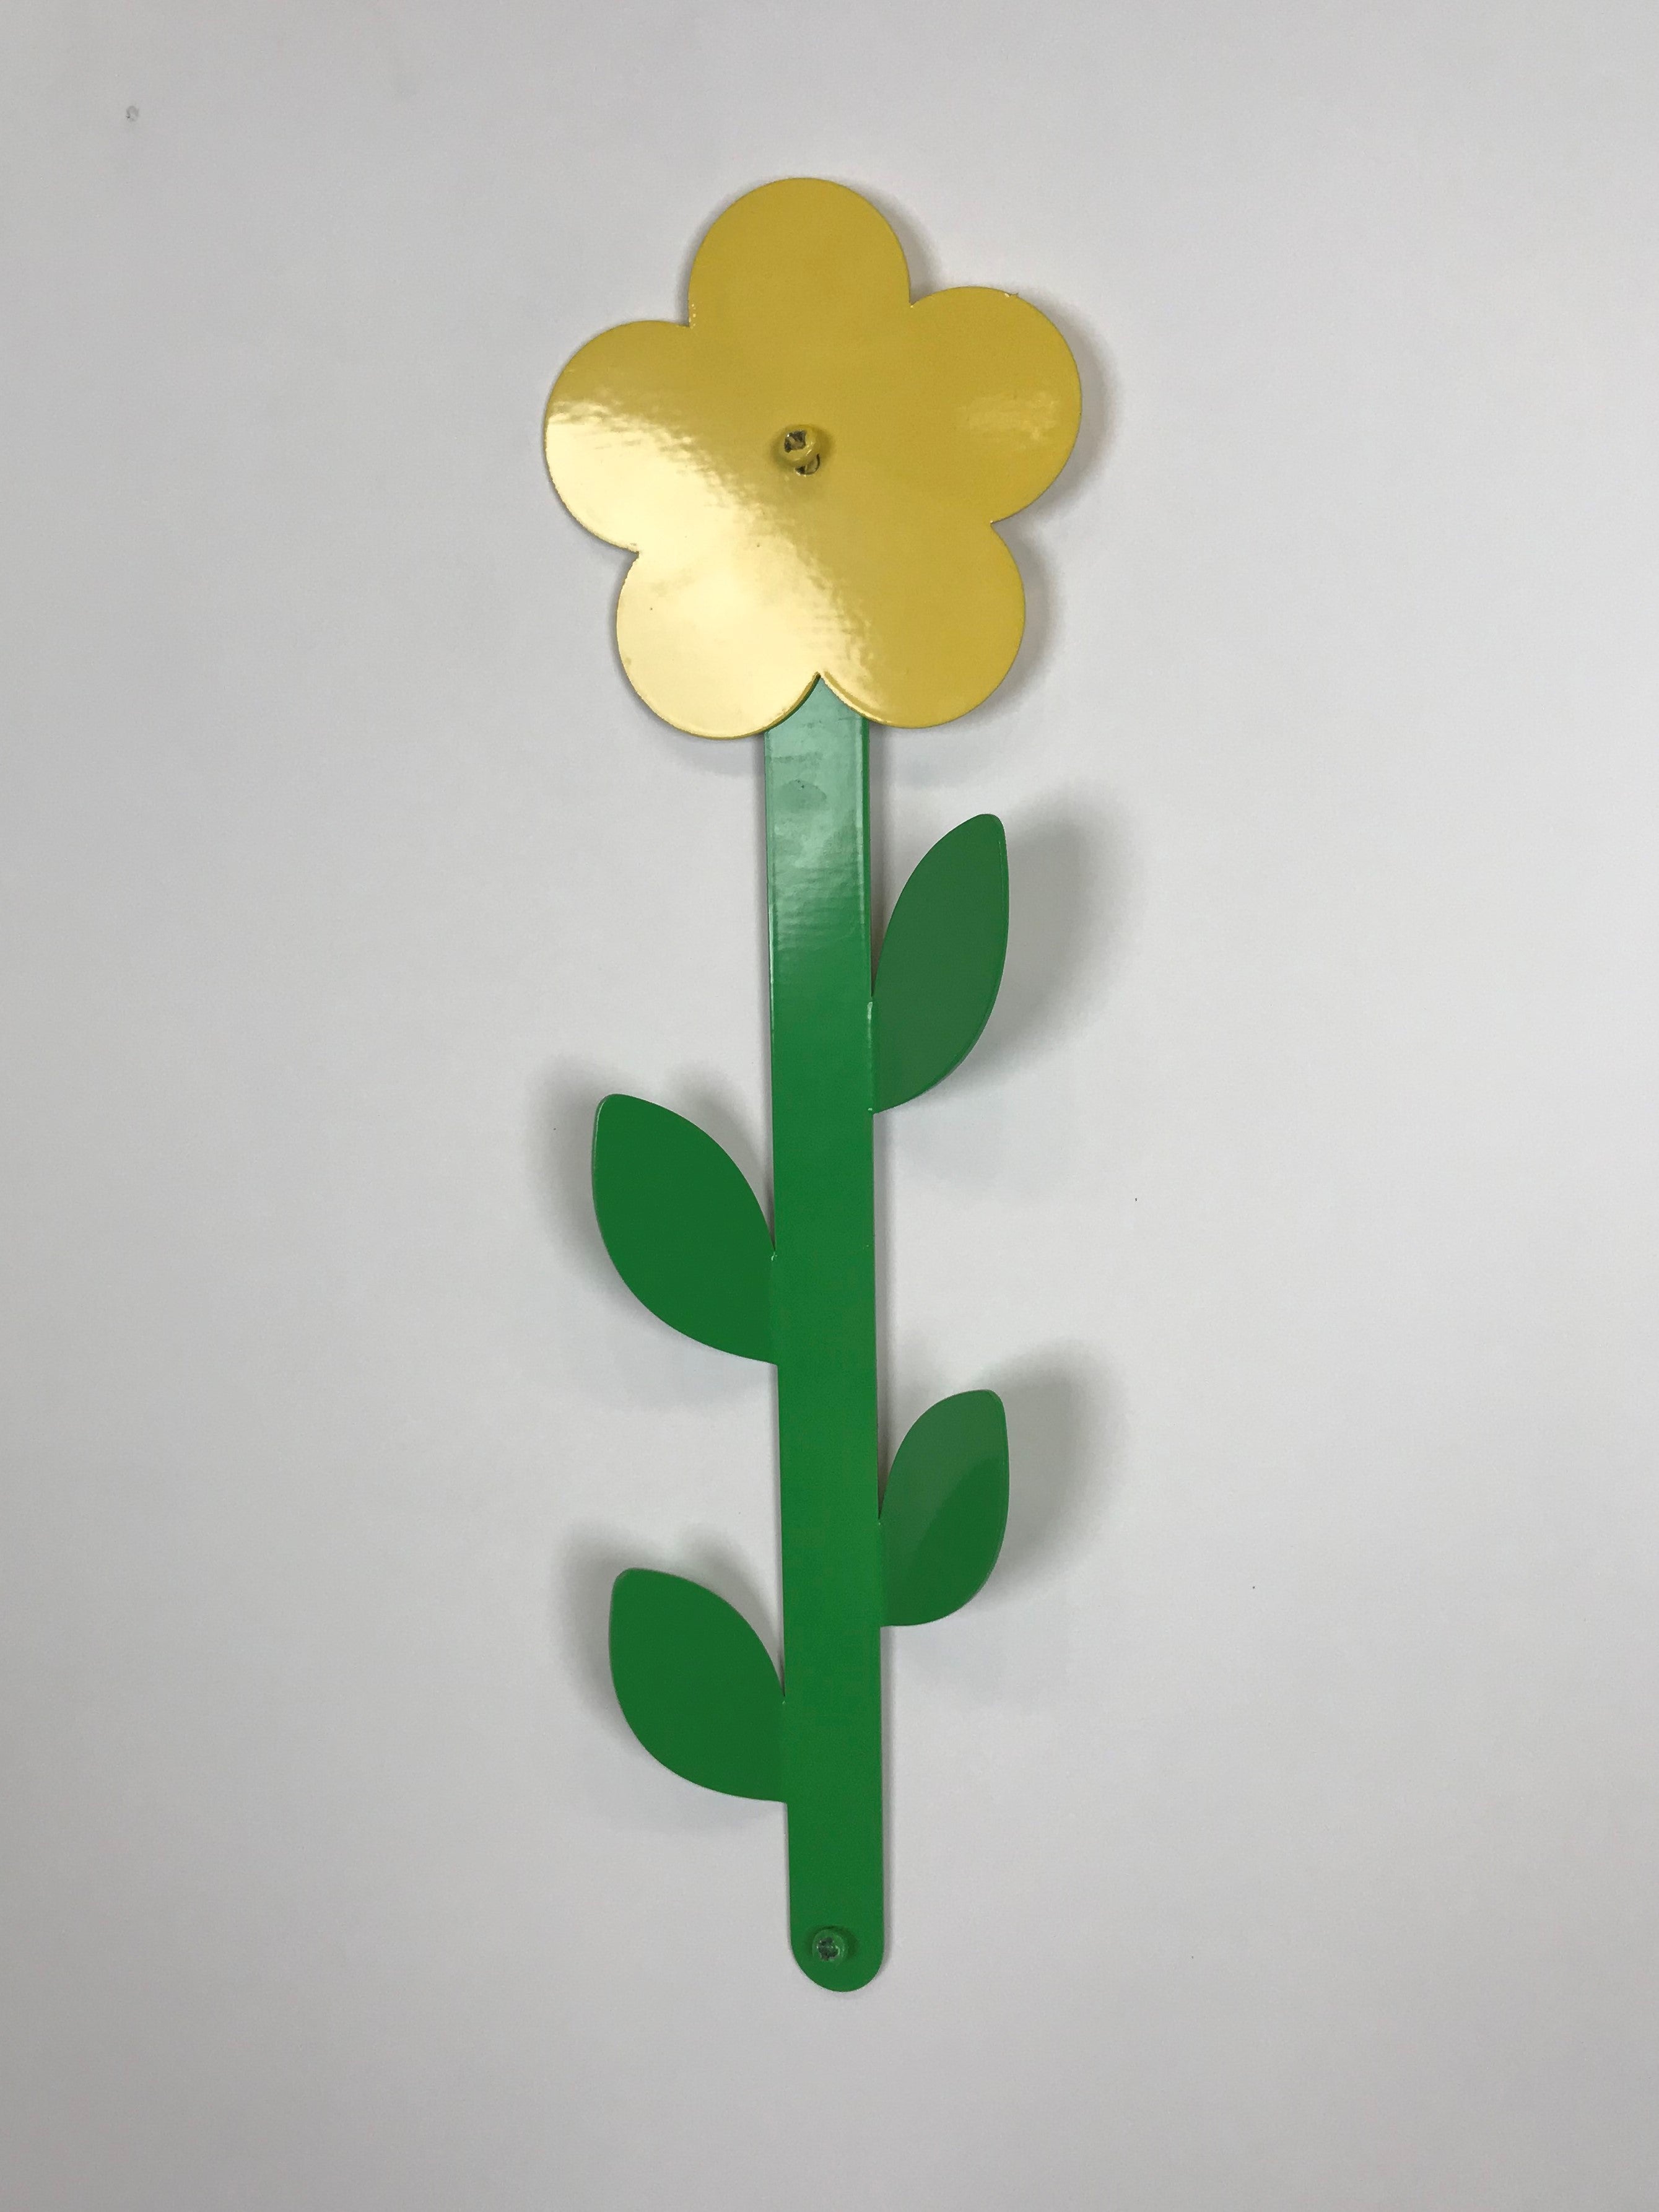 Metal Flower Shape, suitable for mounting on walls in children's bedrooms. Made from steel